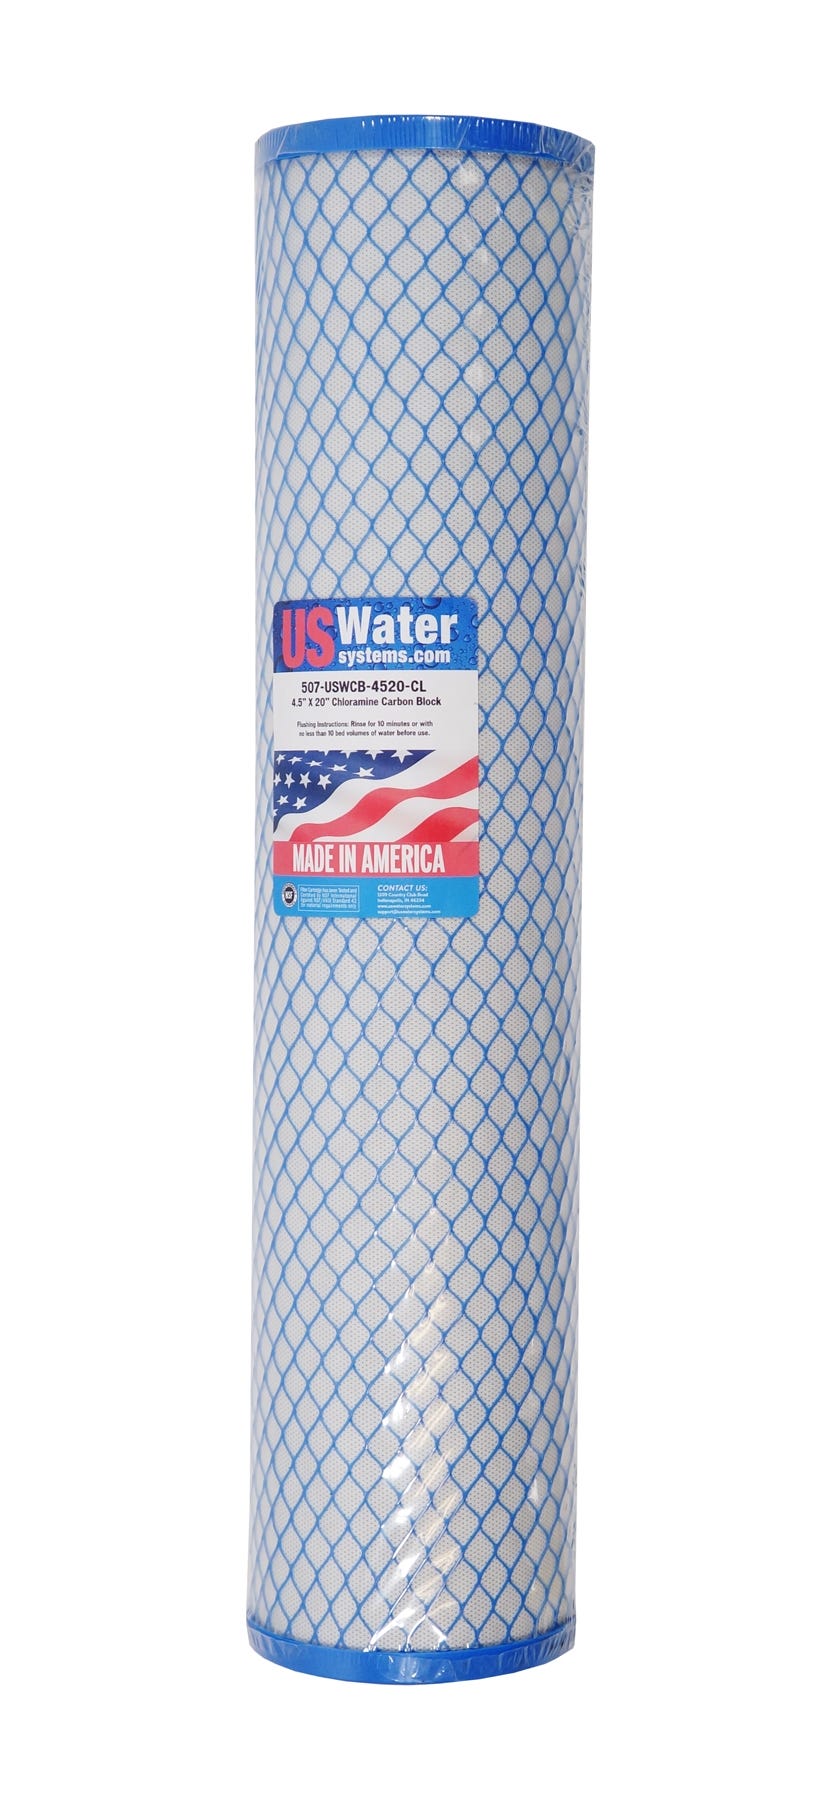 US Water Chloramine Carbon Block Filter | USWCB-4520-CL